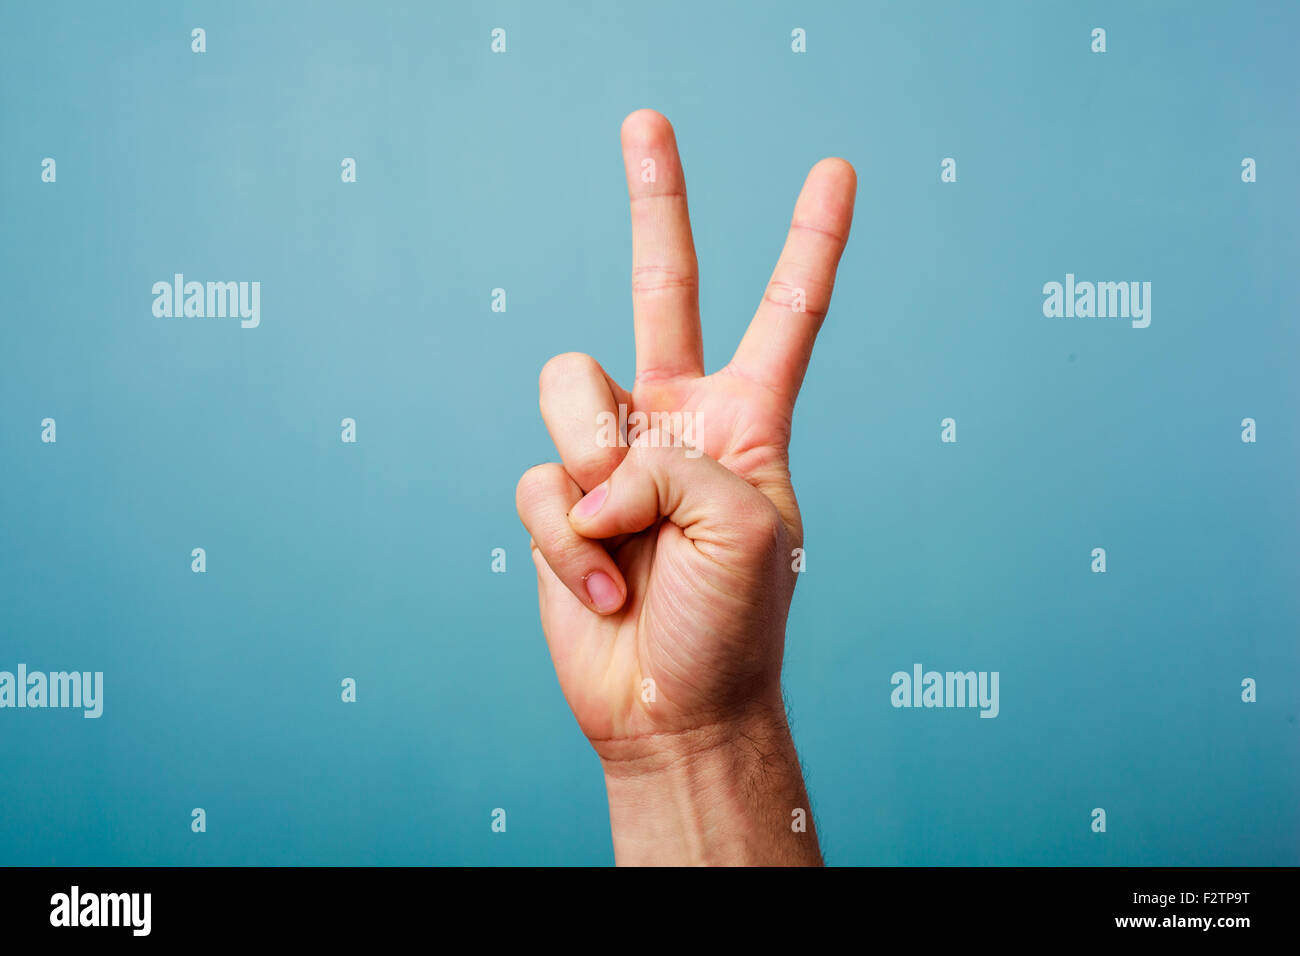 Hand gesturing victory on a blue background Stock Photo